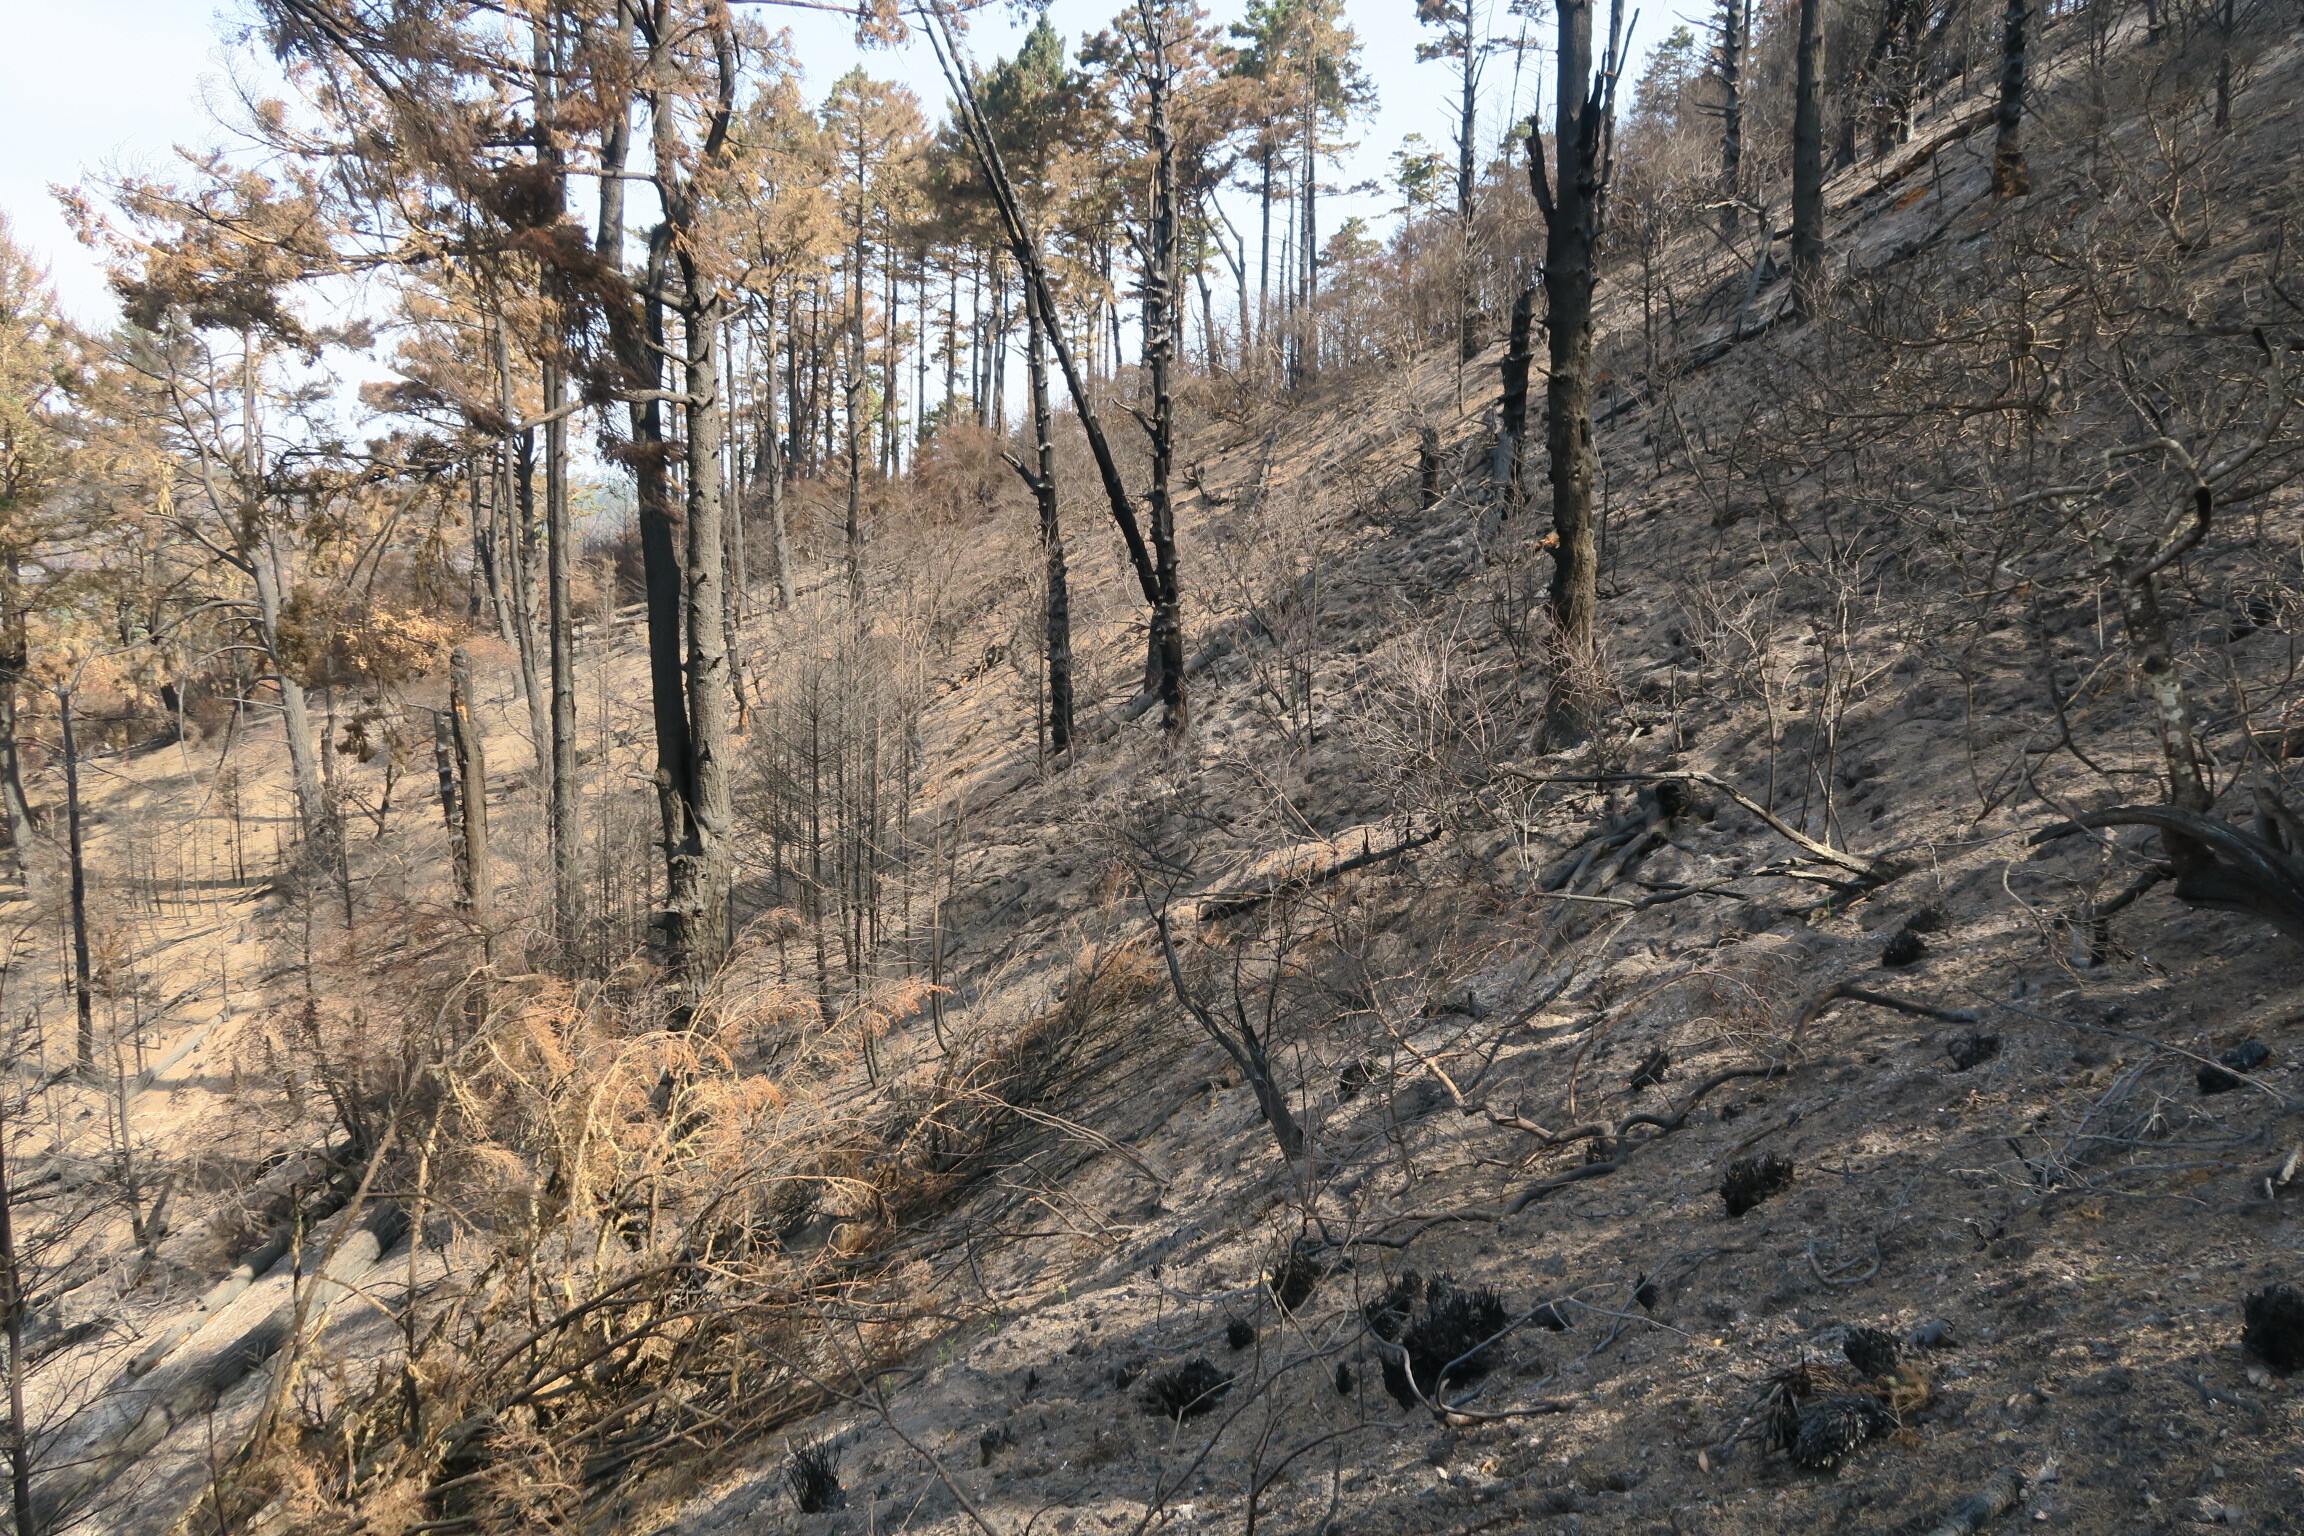 Gray ash covers the ground on a slope around the trunks of fire-blackened trees.